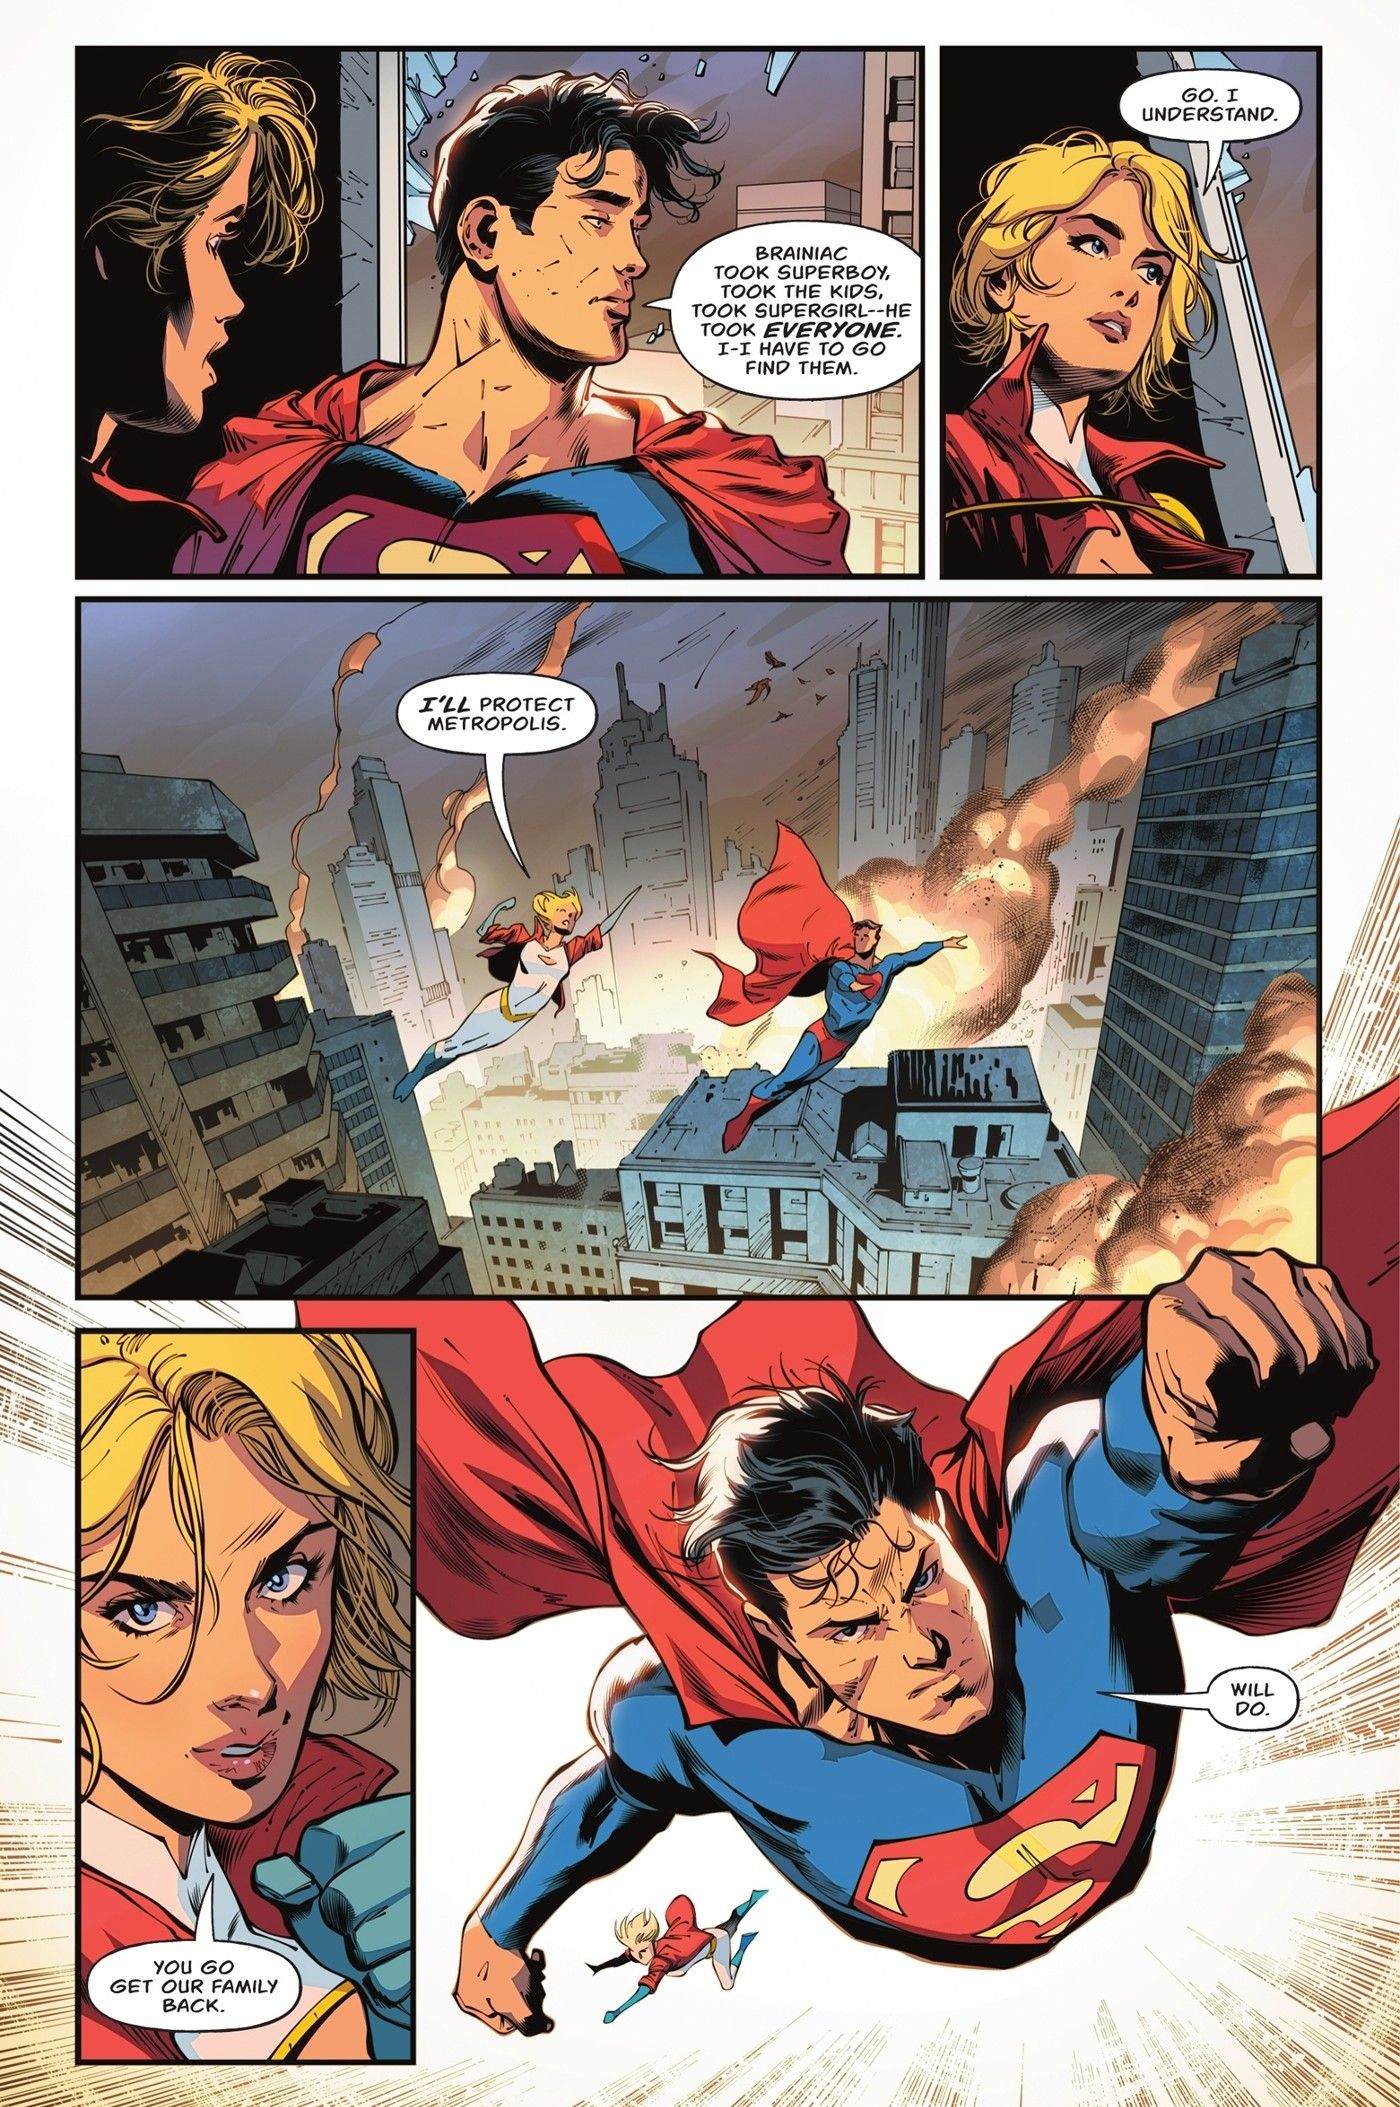 Superman Entrusts Only 1 Hero with Metropolis, Reshaping His Family’s Hierarchy